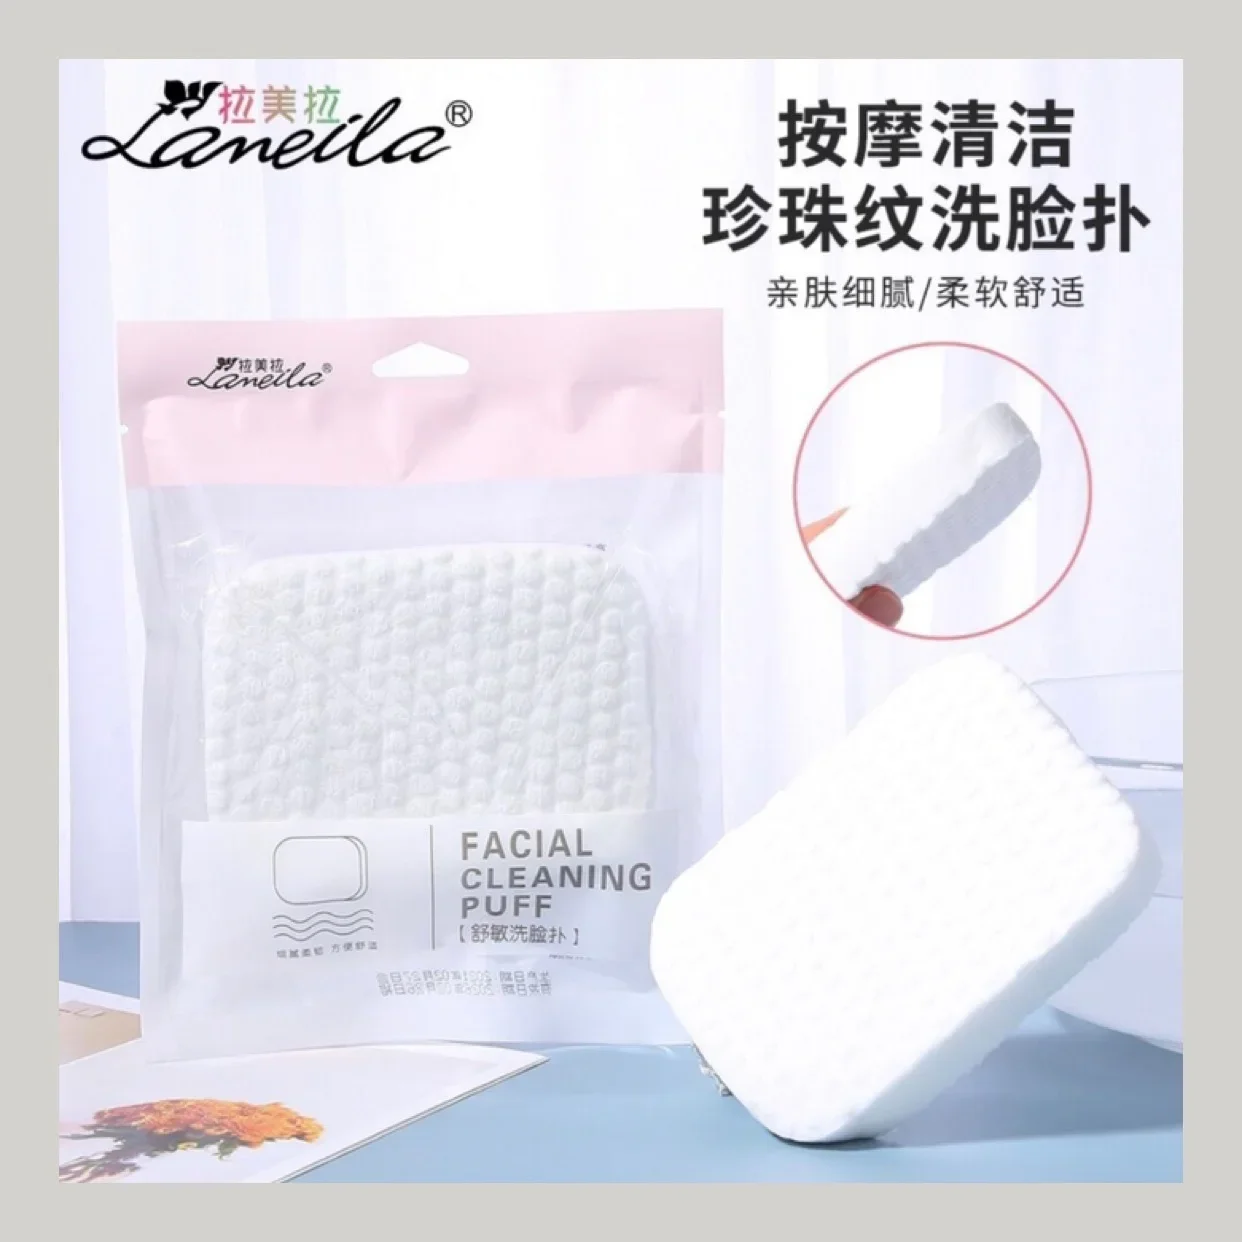 【Ready Stock】1pc Lameila Facial Sponge Face Wash Cosmetics Puff Cleanse Cleansing make up remover cleansing Spa Medispa washing/洗脸扑清洁柔软亲肤洁净面部 清洁补